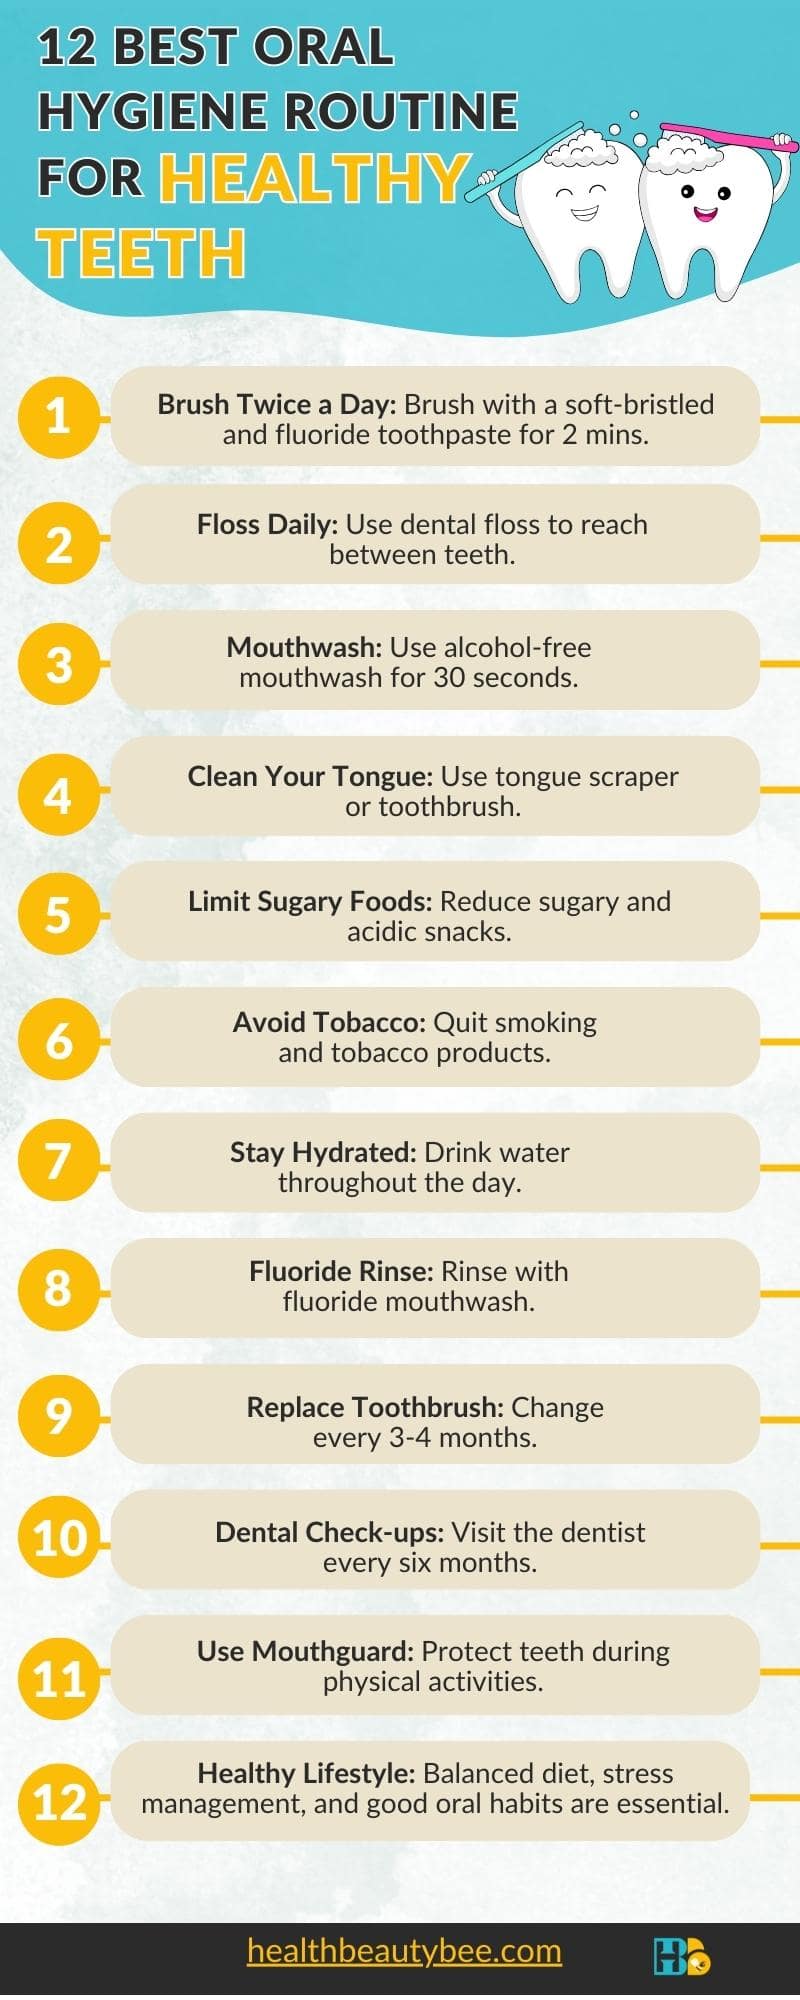 Best Oral Hygiene Routine for Healthy Teeth healthbeautybee infographic